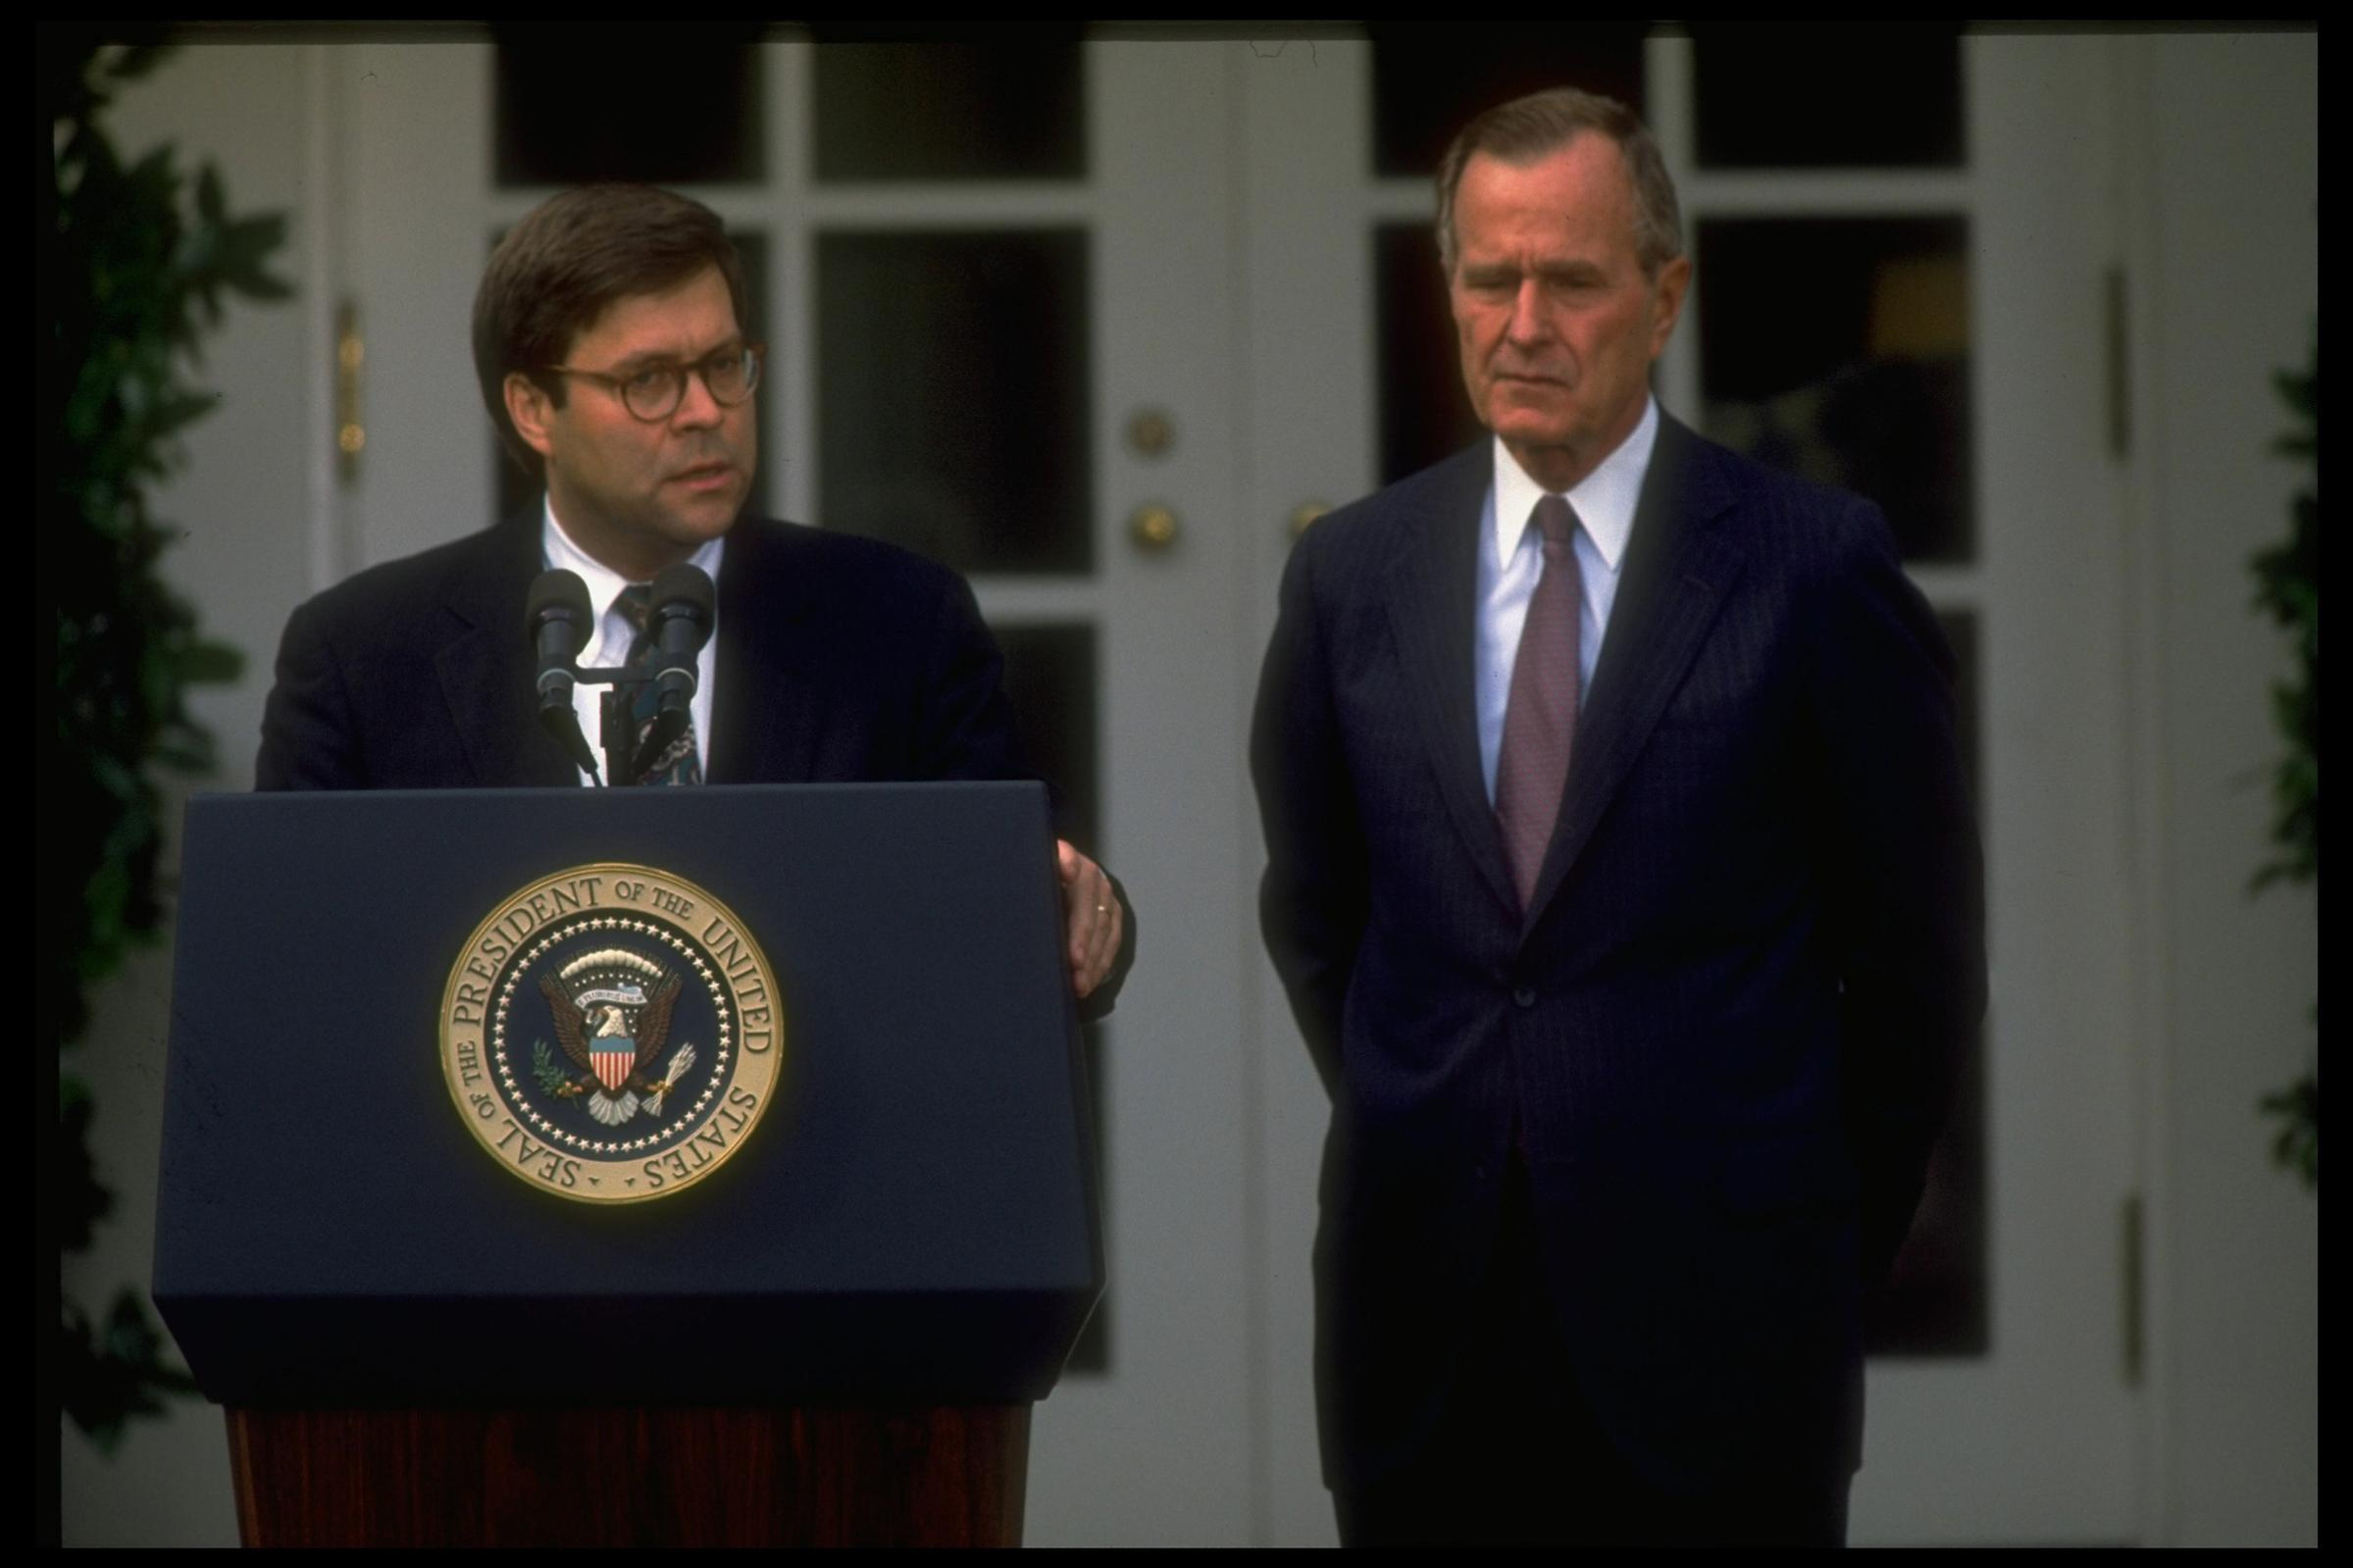 Barr joins President George H.W. Bush for the announcement of his nomination as AG in 1991